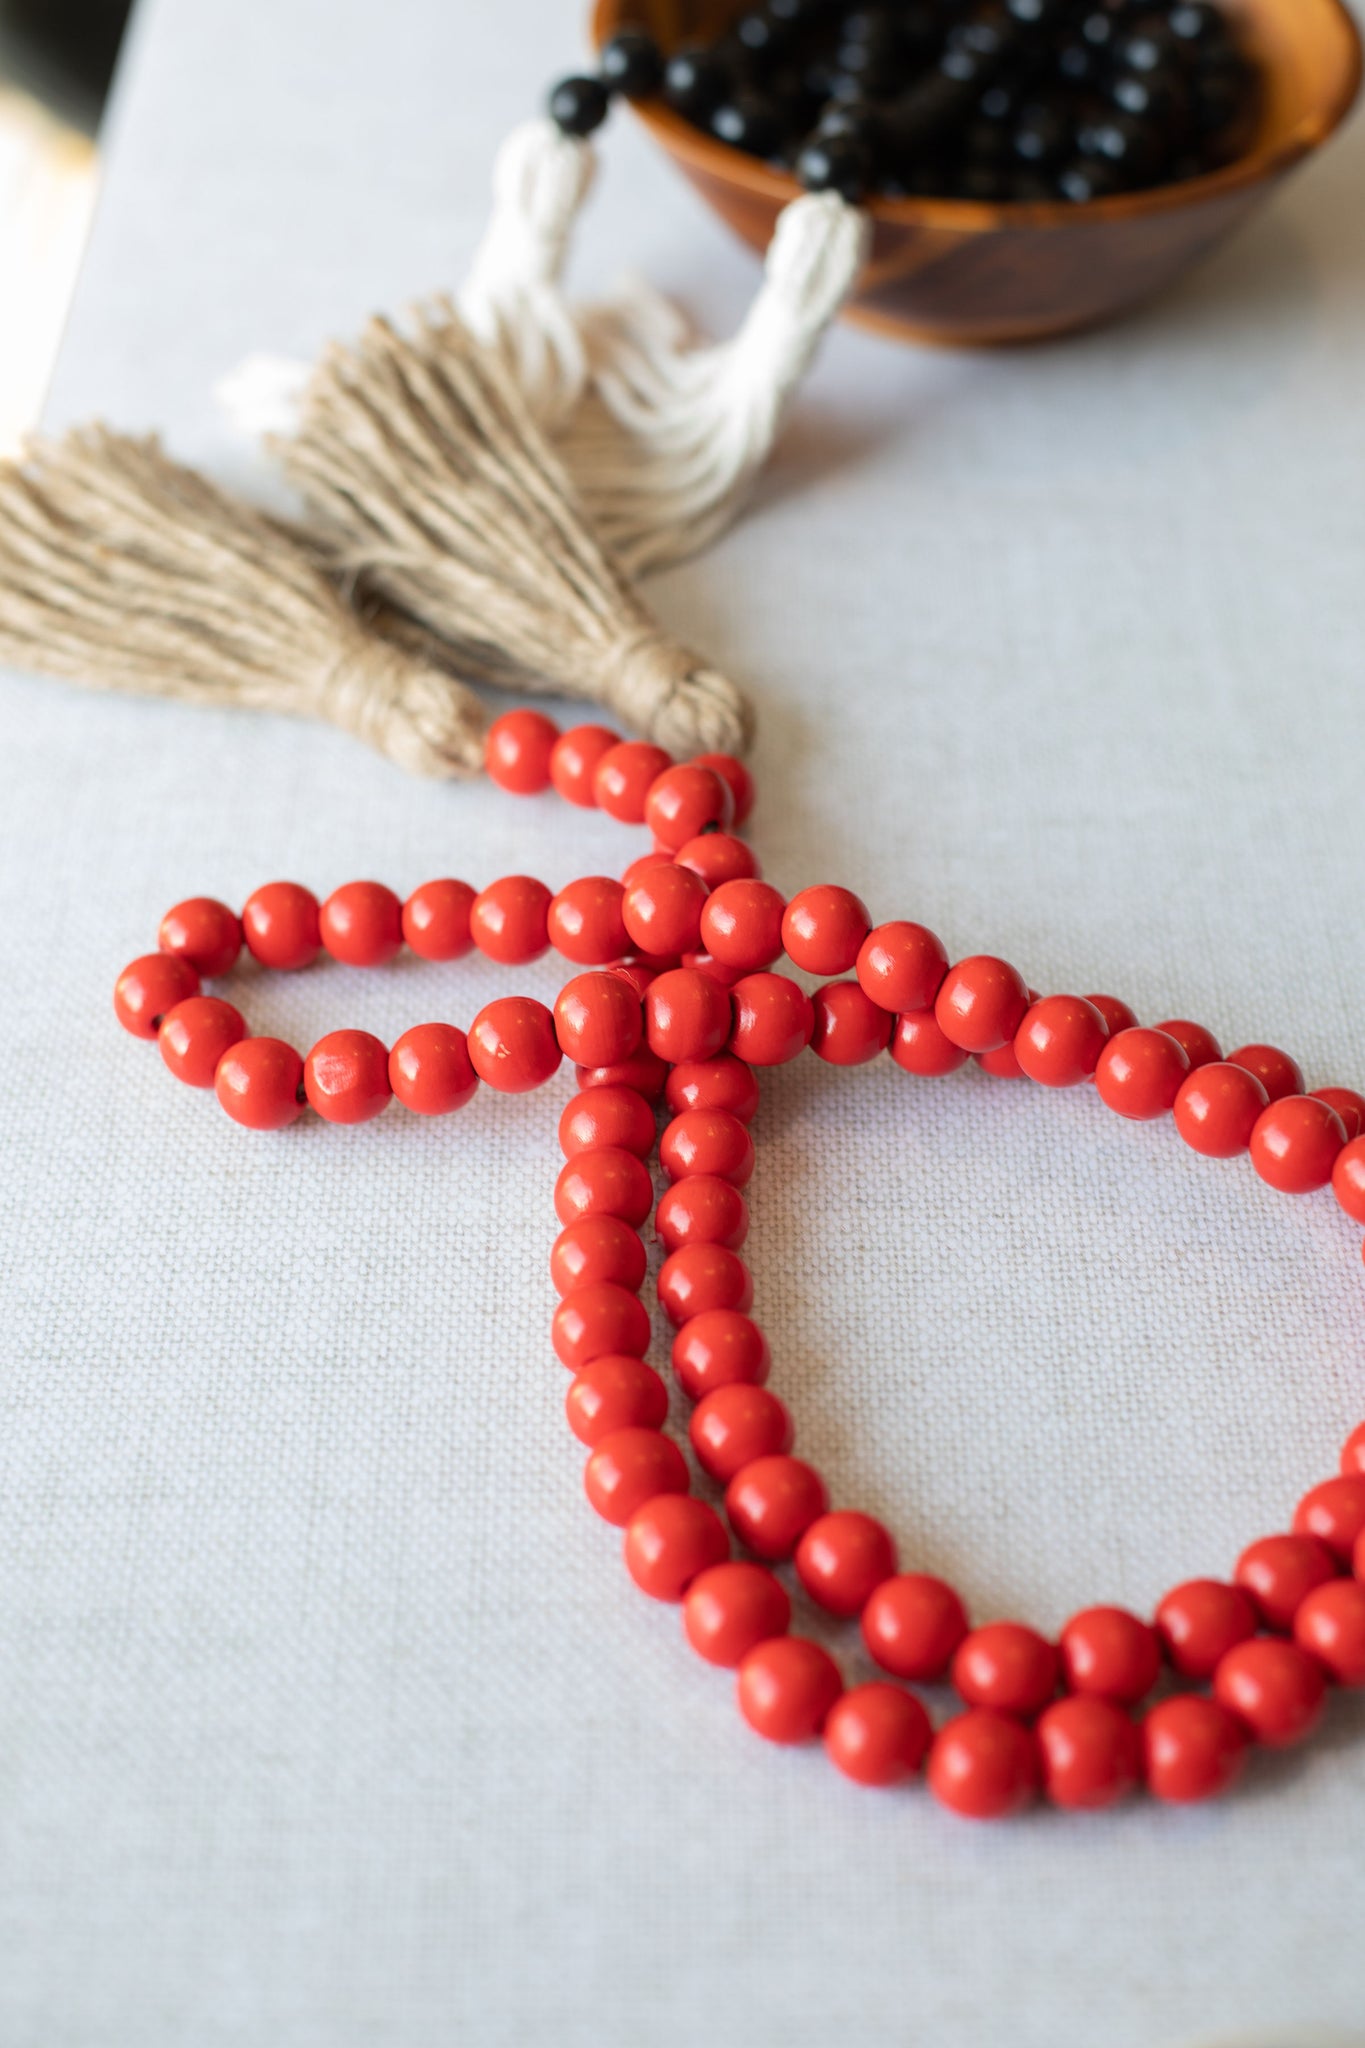 QIIBURR Red Wooden Beads Garland Wood Beads Garland with Tassels 5 Styles  Beads Rustic Natural Wooden Bead Wood Garland Beads 